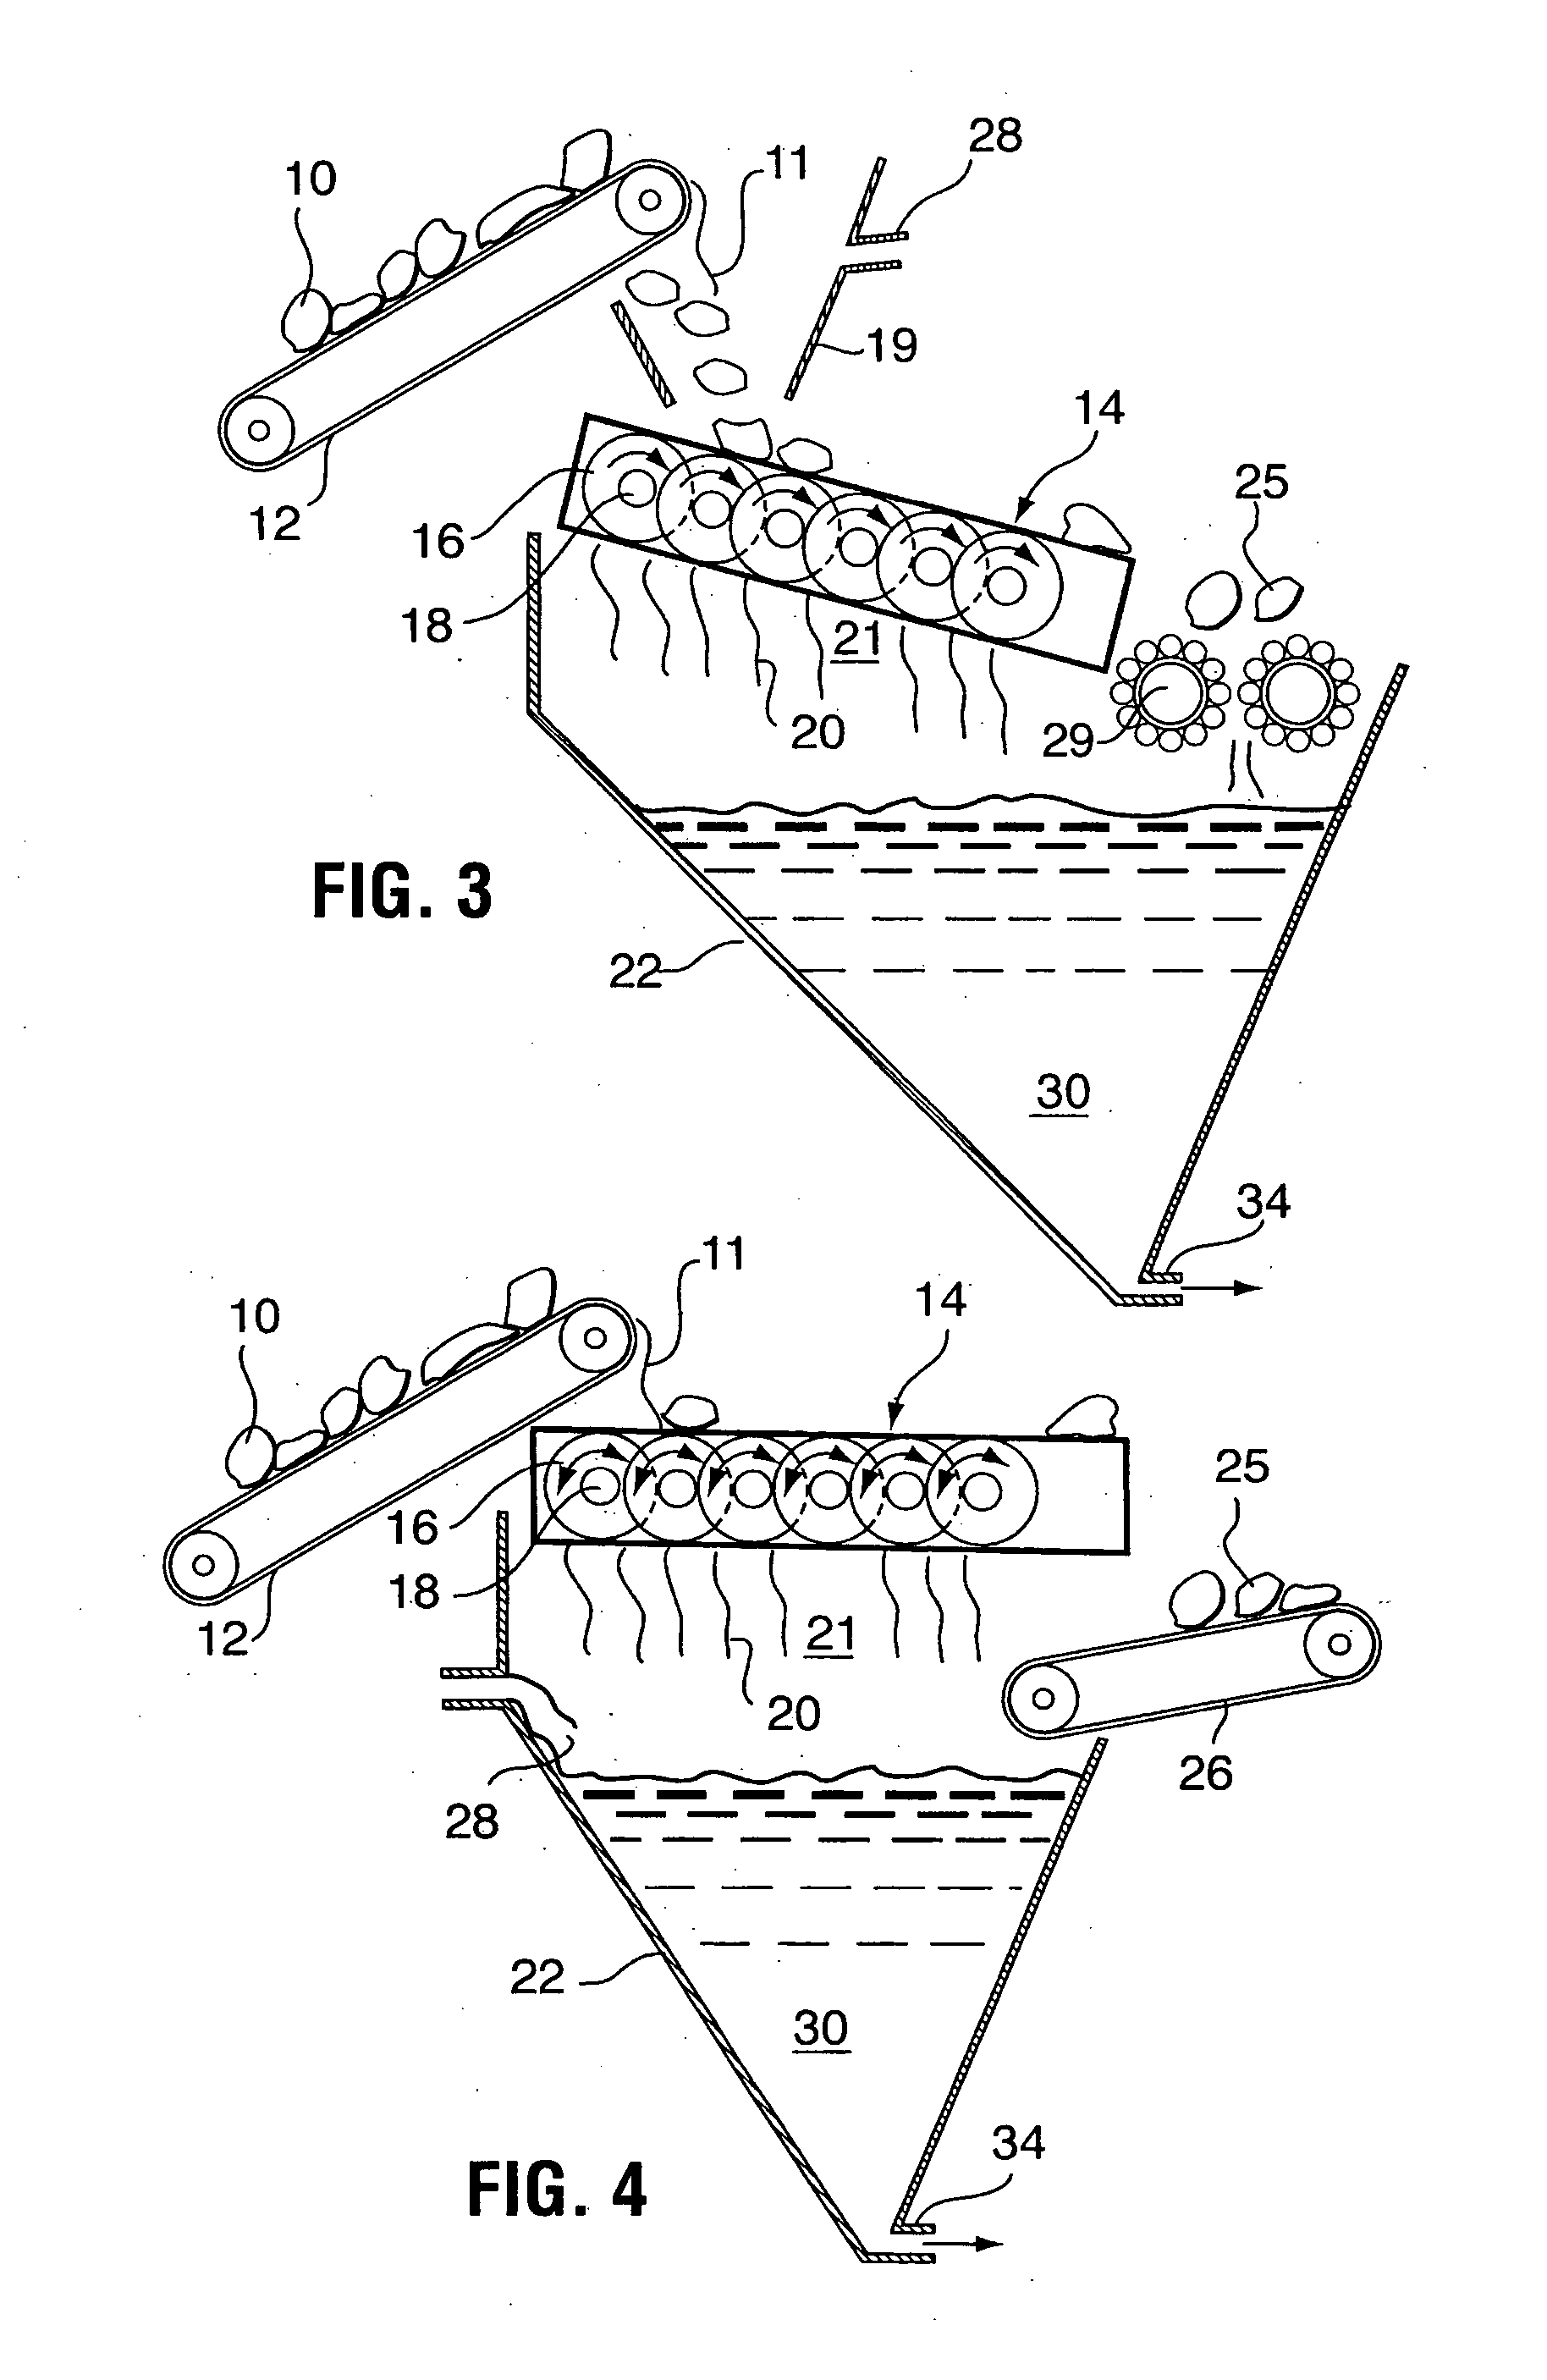 Sizing roller screen ore processing apparatus